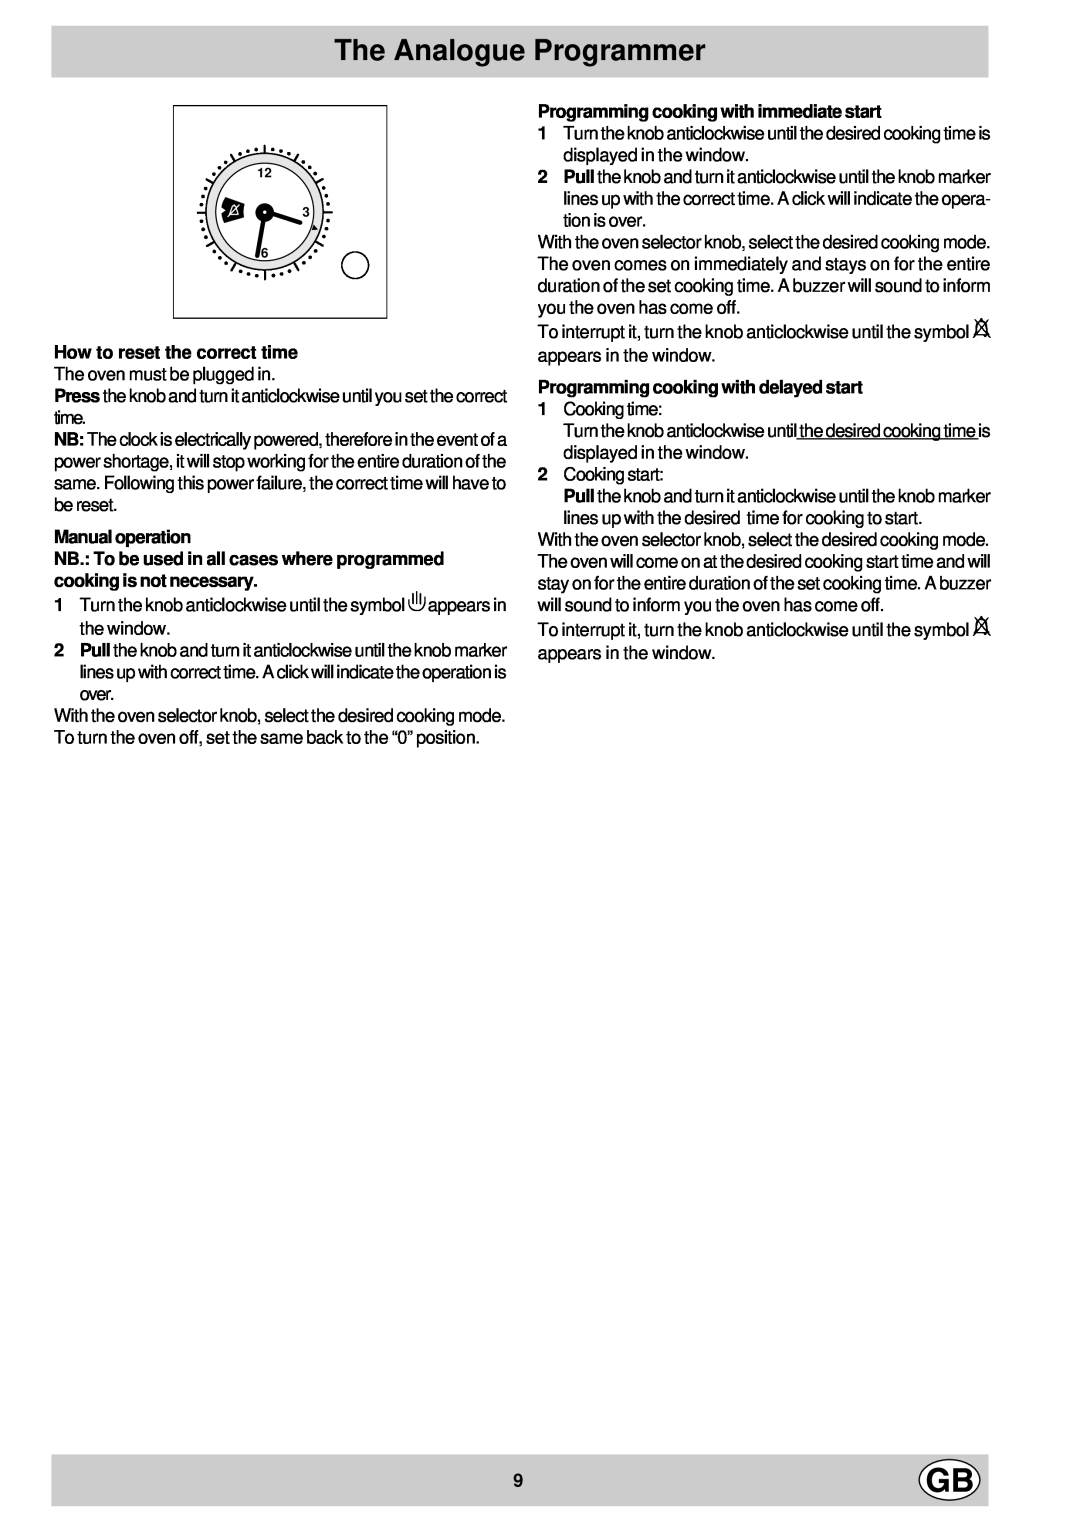 Hotpoint ST55X - ST52 manual The Analogue Programmer, How to reset the correct time, Manual operation 